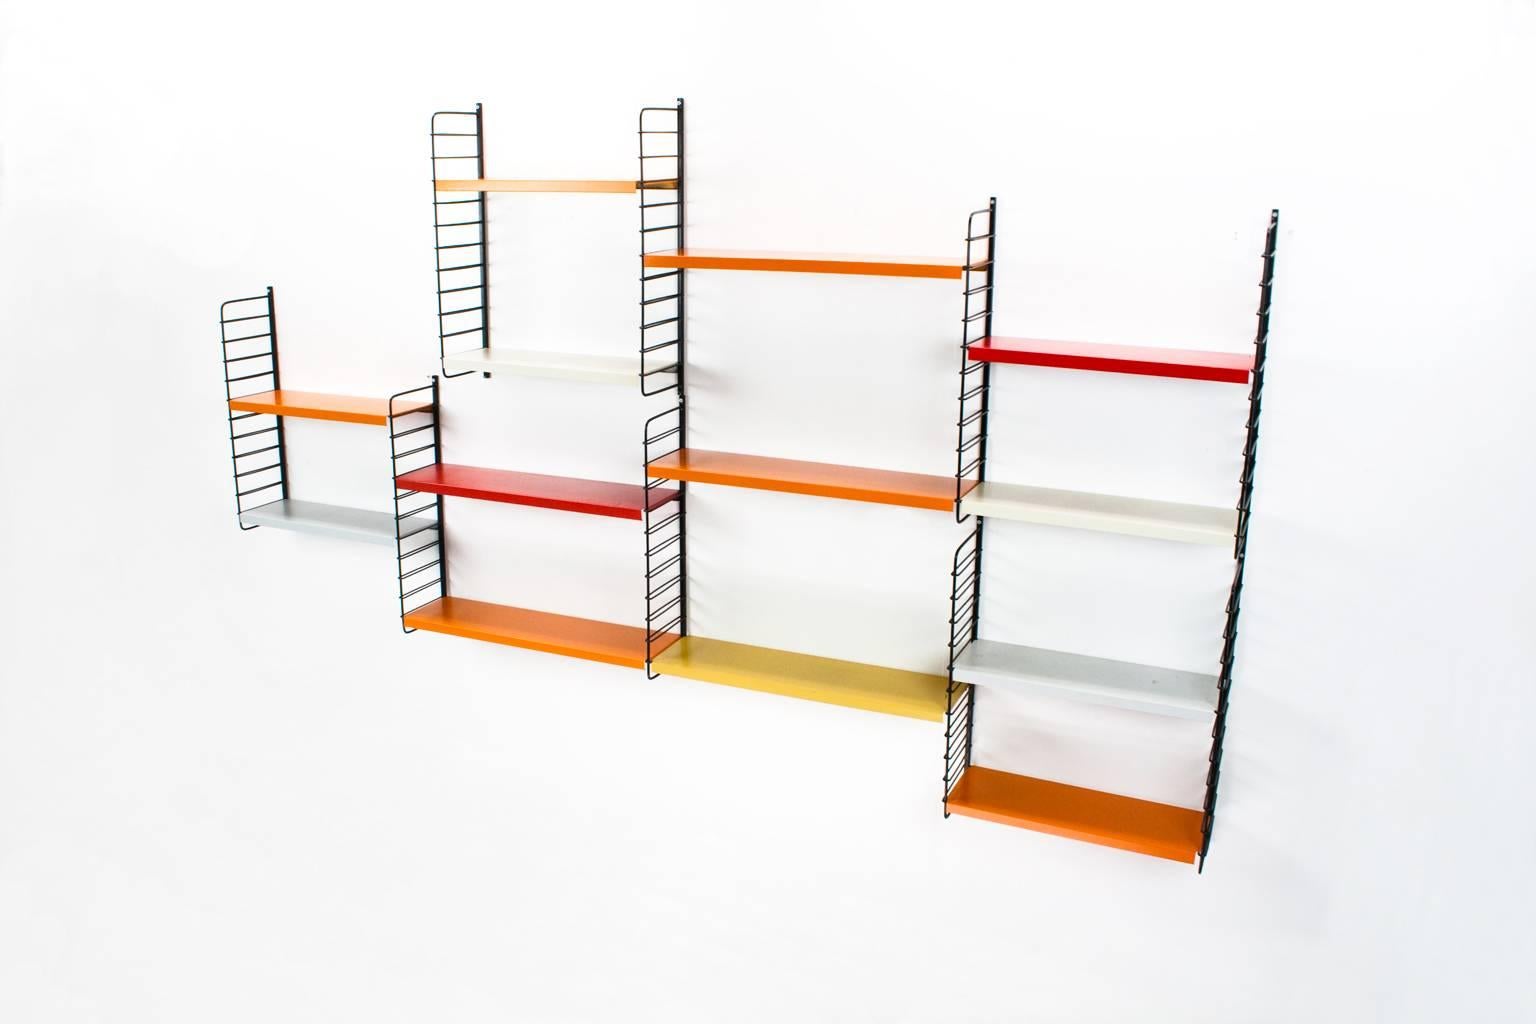 Original bright colored Dutch Mid-Century Modern multicolored modular system of Pilastro designed in the 1960s by Tjerk Reijenga in very good condition. Only some shelves have light patina, but most are in excellent condition.

The design was